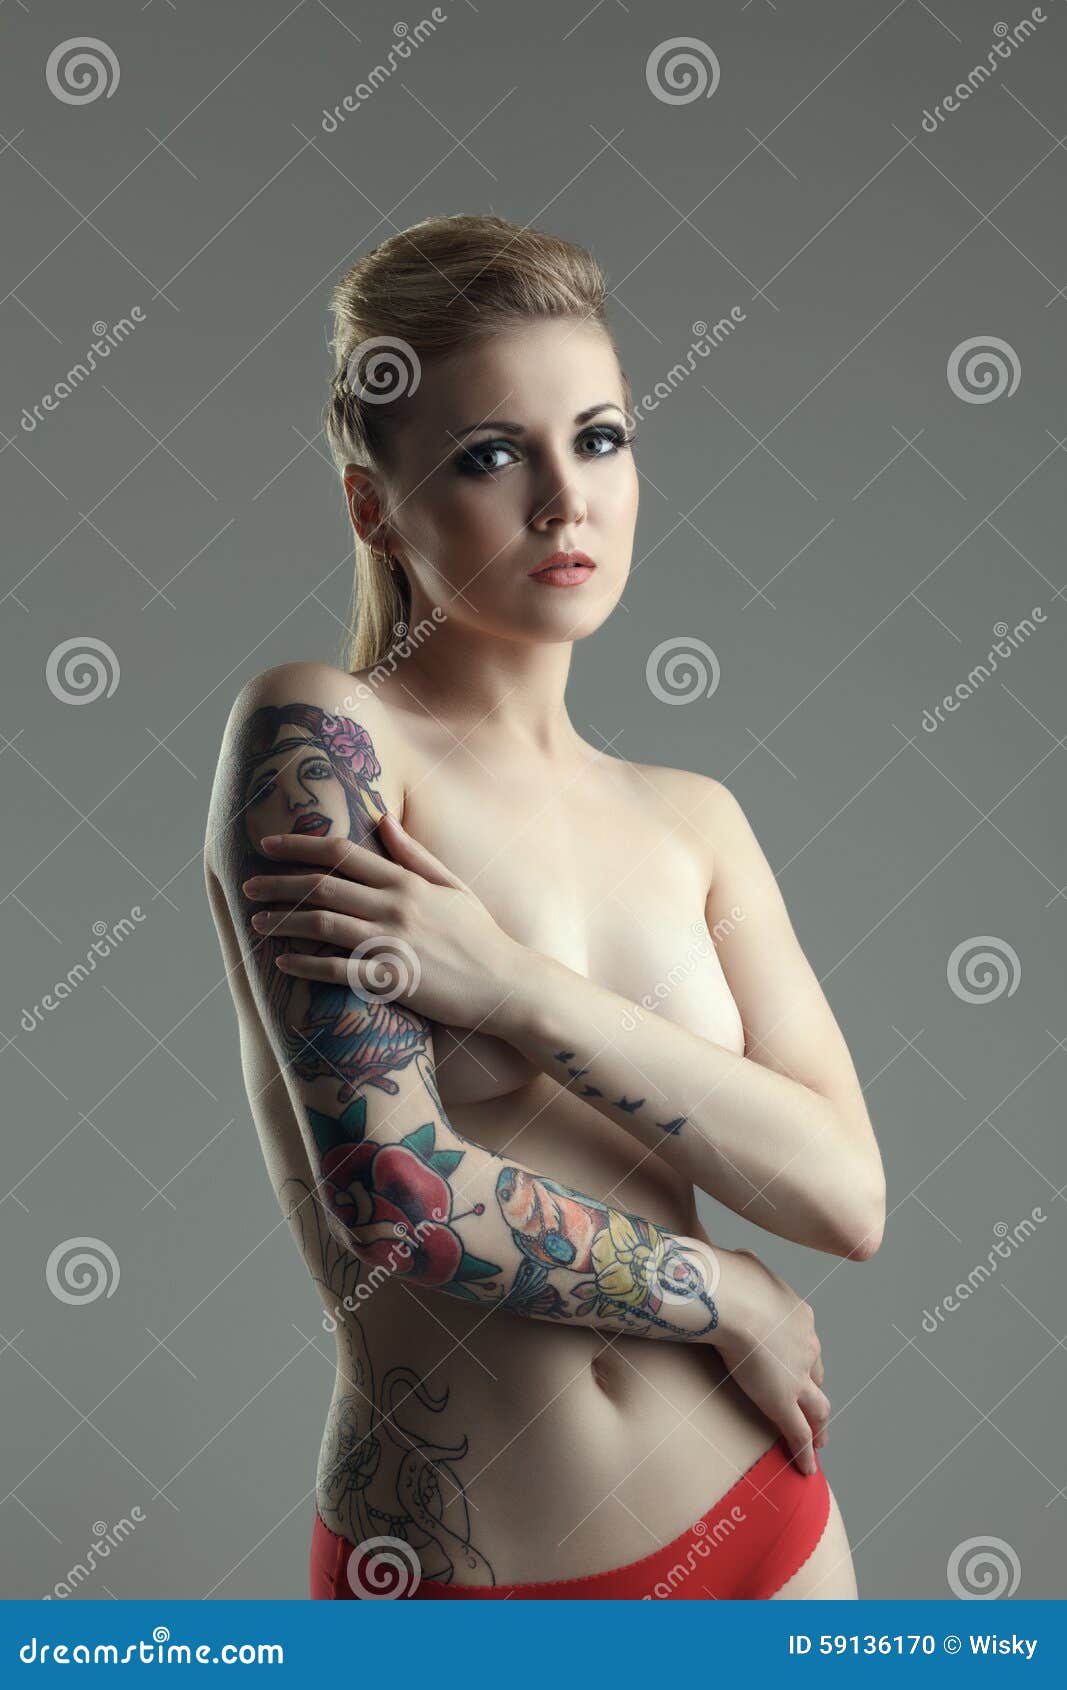 nude woman with tattoos